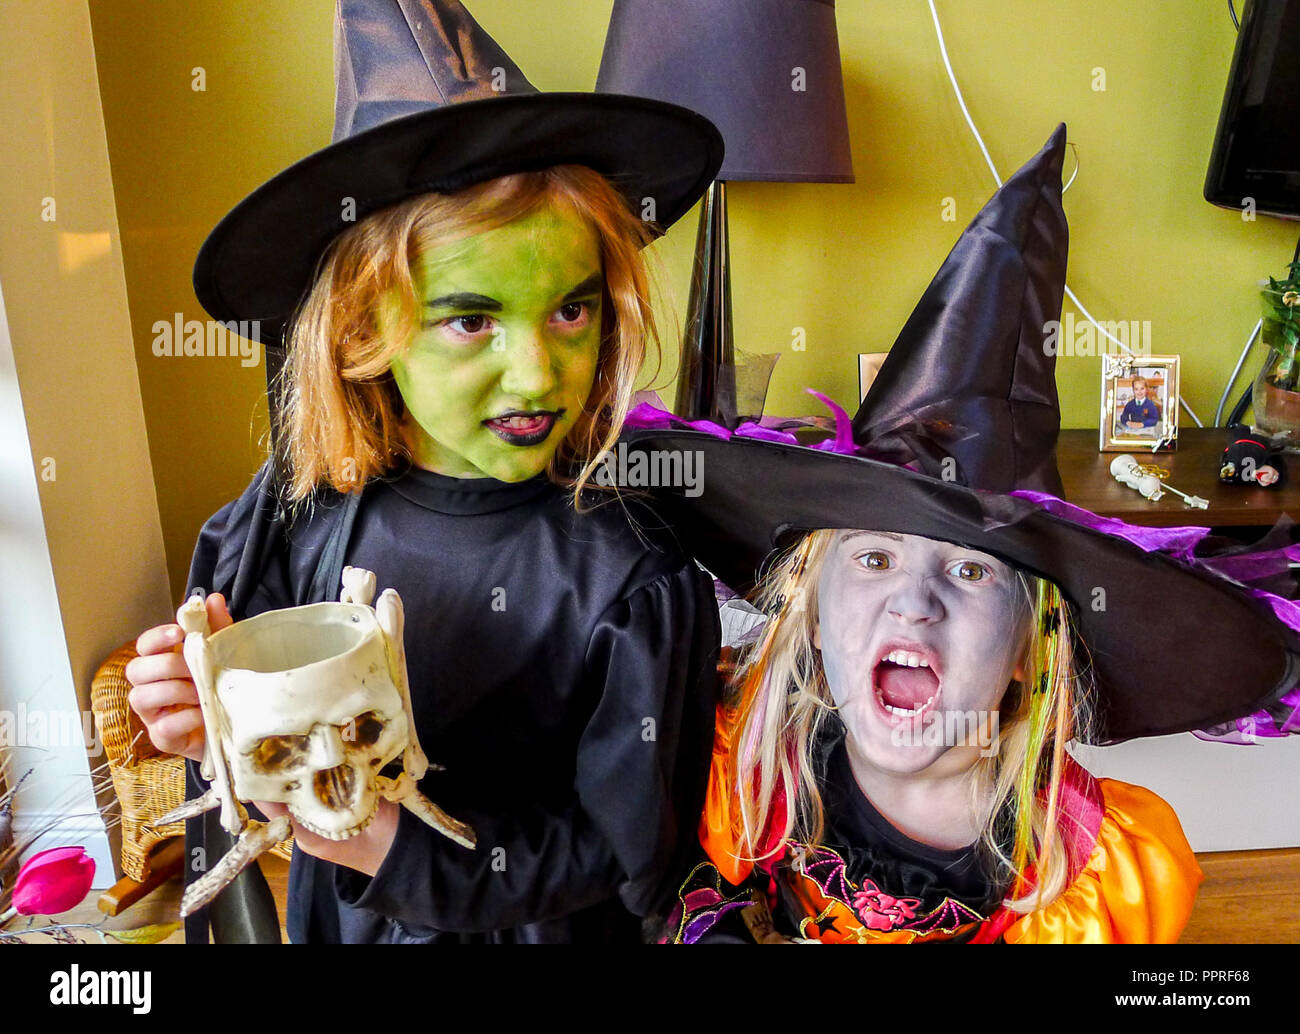 Little girls children dressed in Witches Halloween costume, wearing black halloween witch costume witch hat, black dresses. Stock Photo